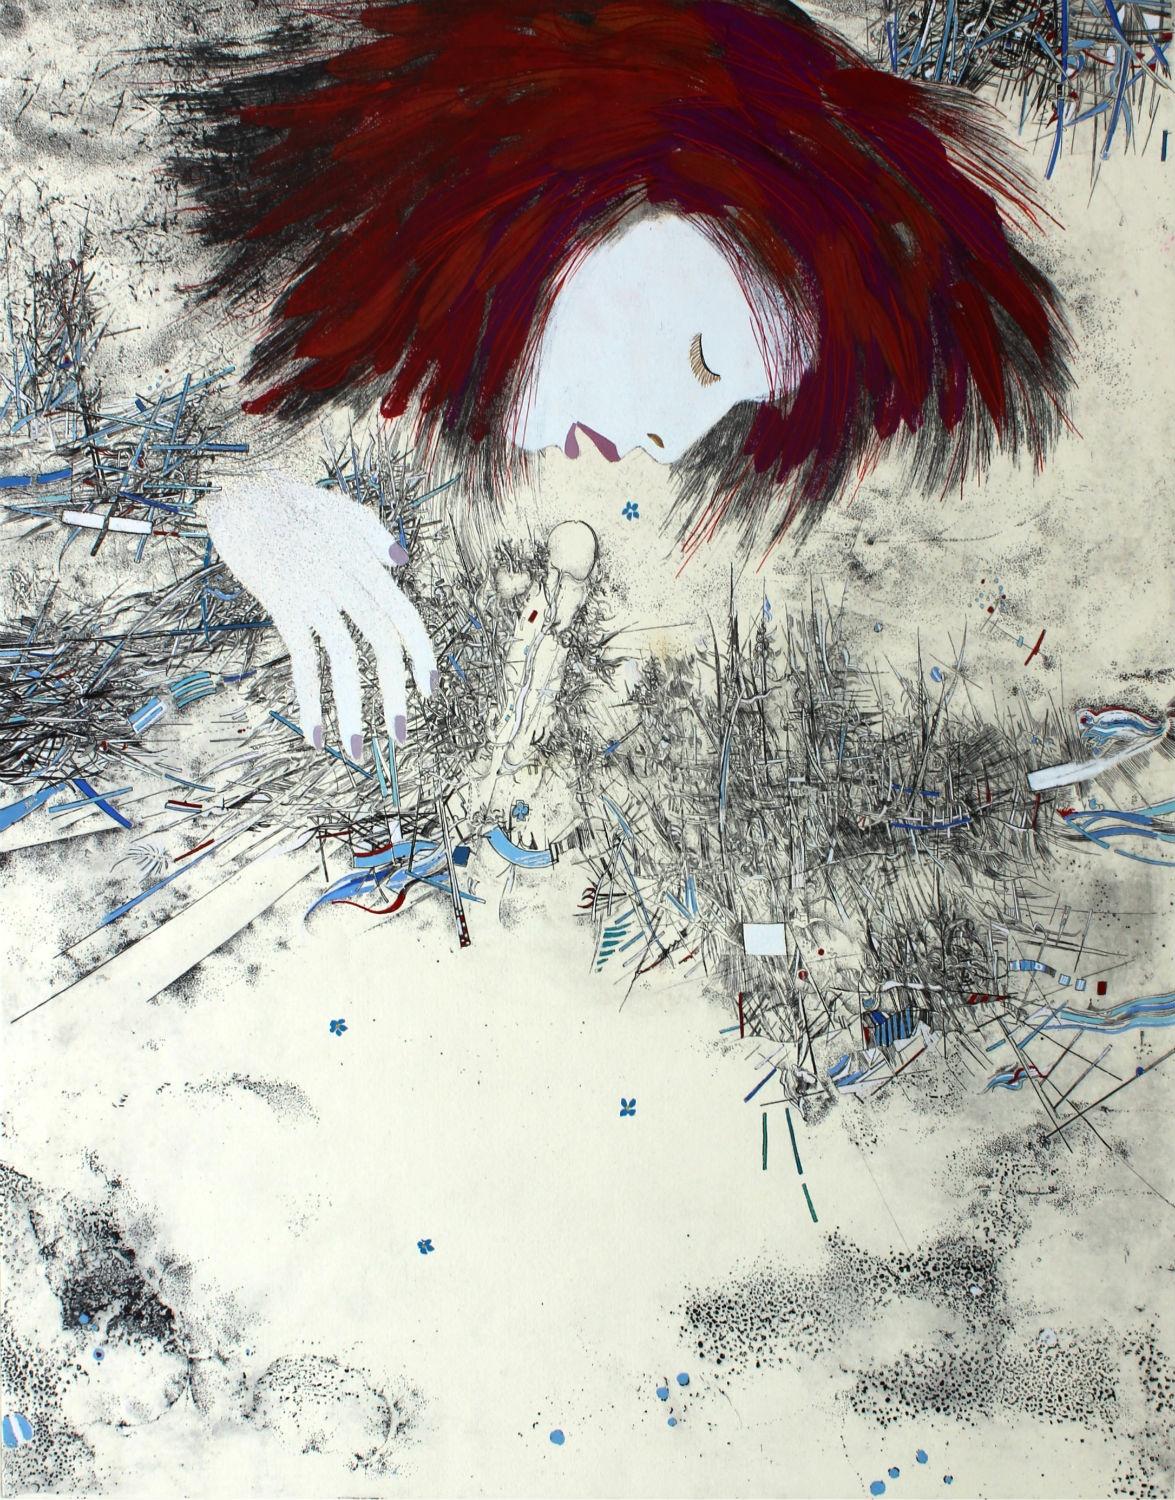 Jacek Sowicki Abstract Print - Forget me nots - XX century, Mixed media print, Figurative, Portrait, Abstract